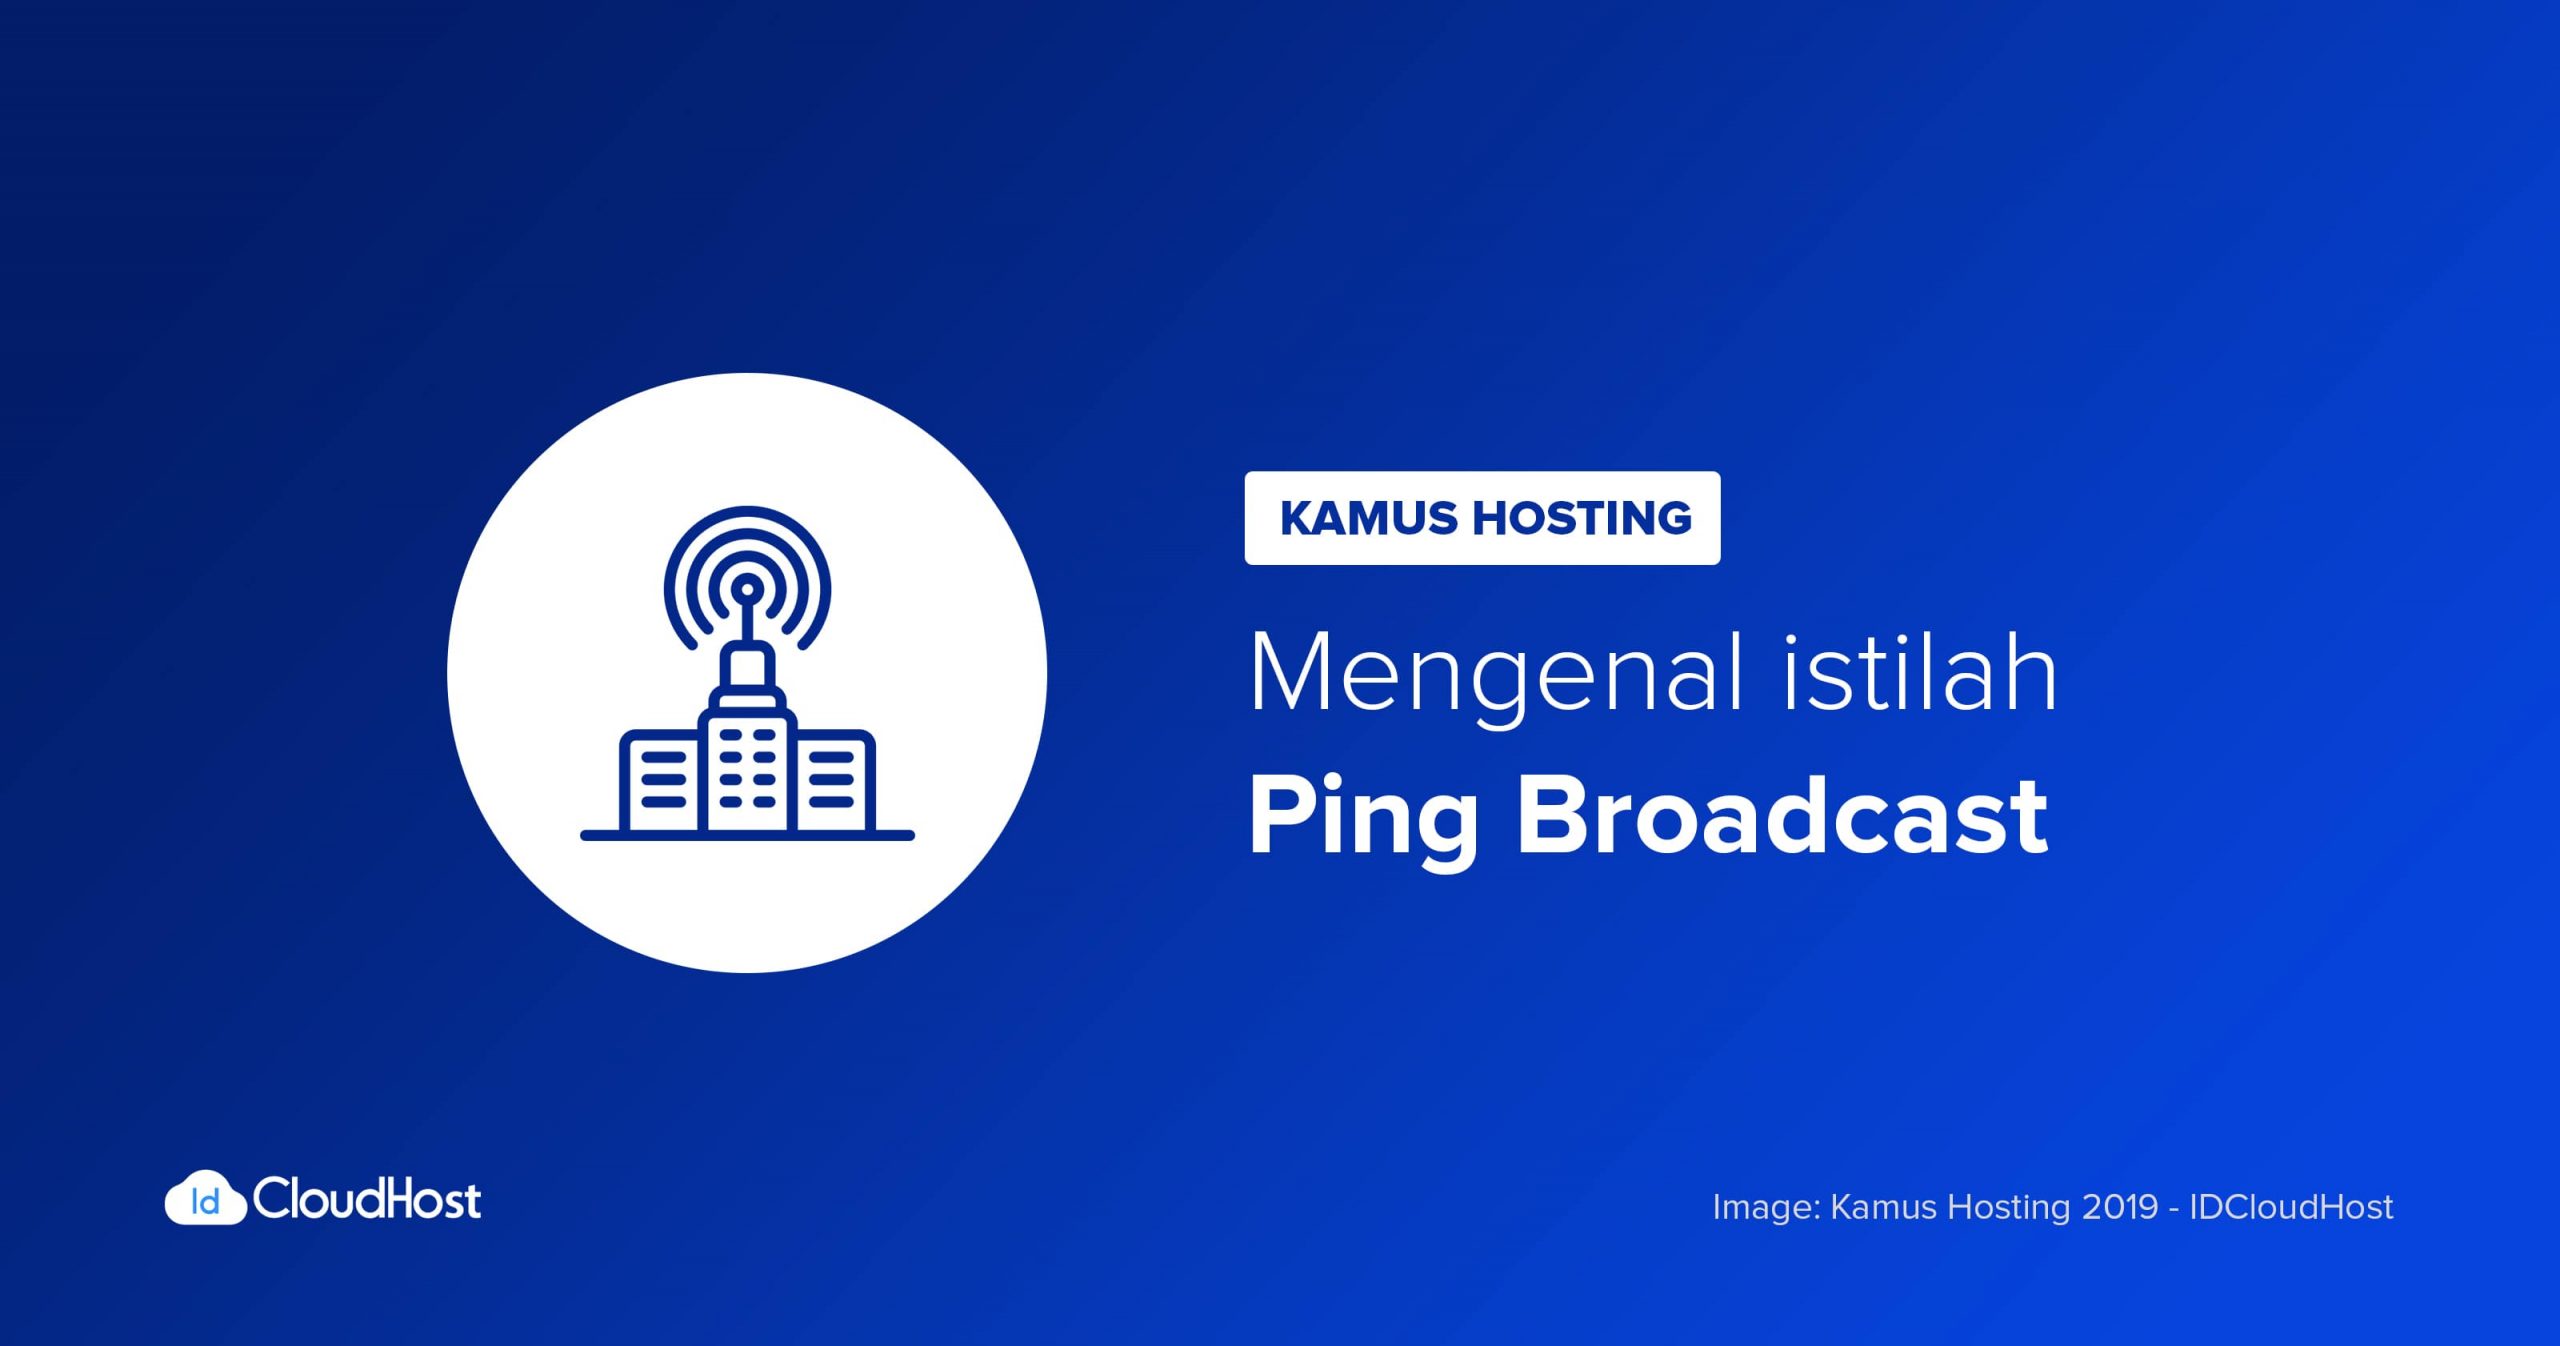 Ping Broadcast